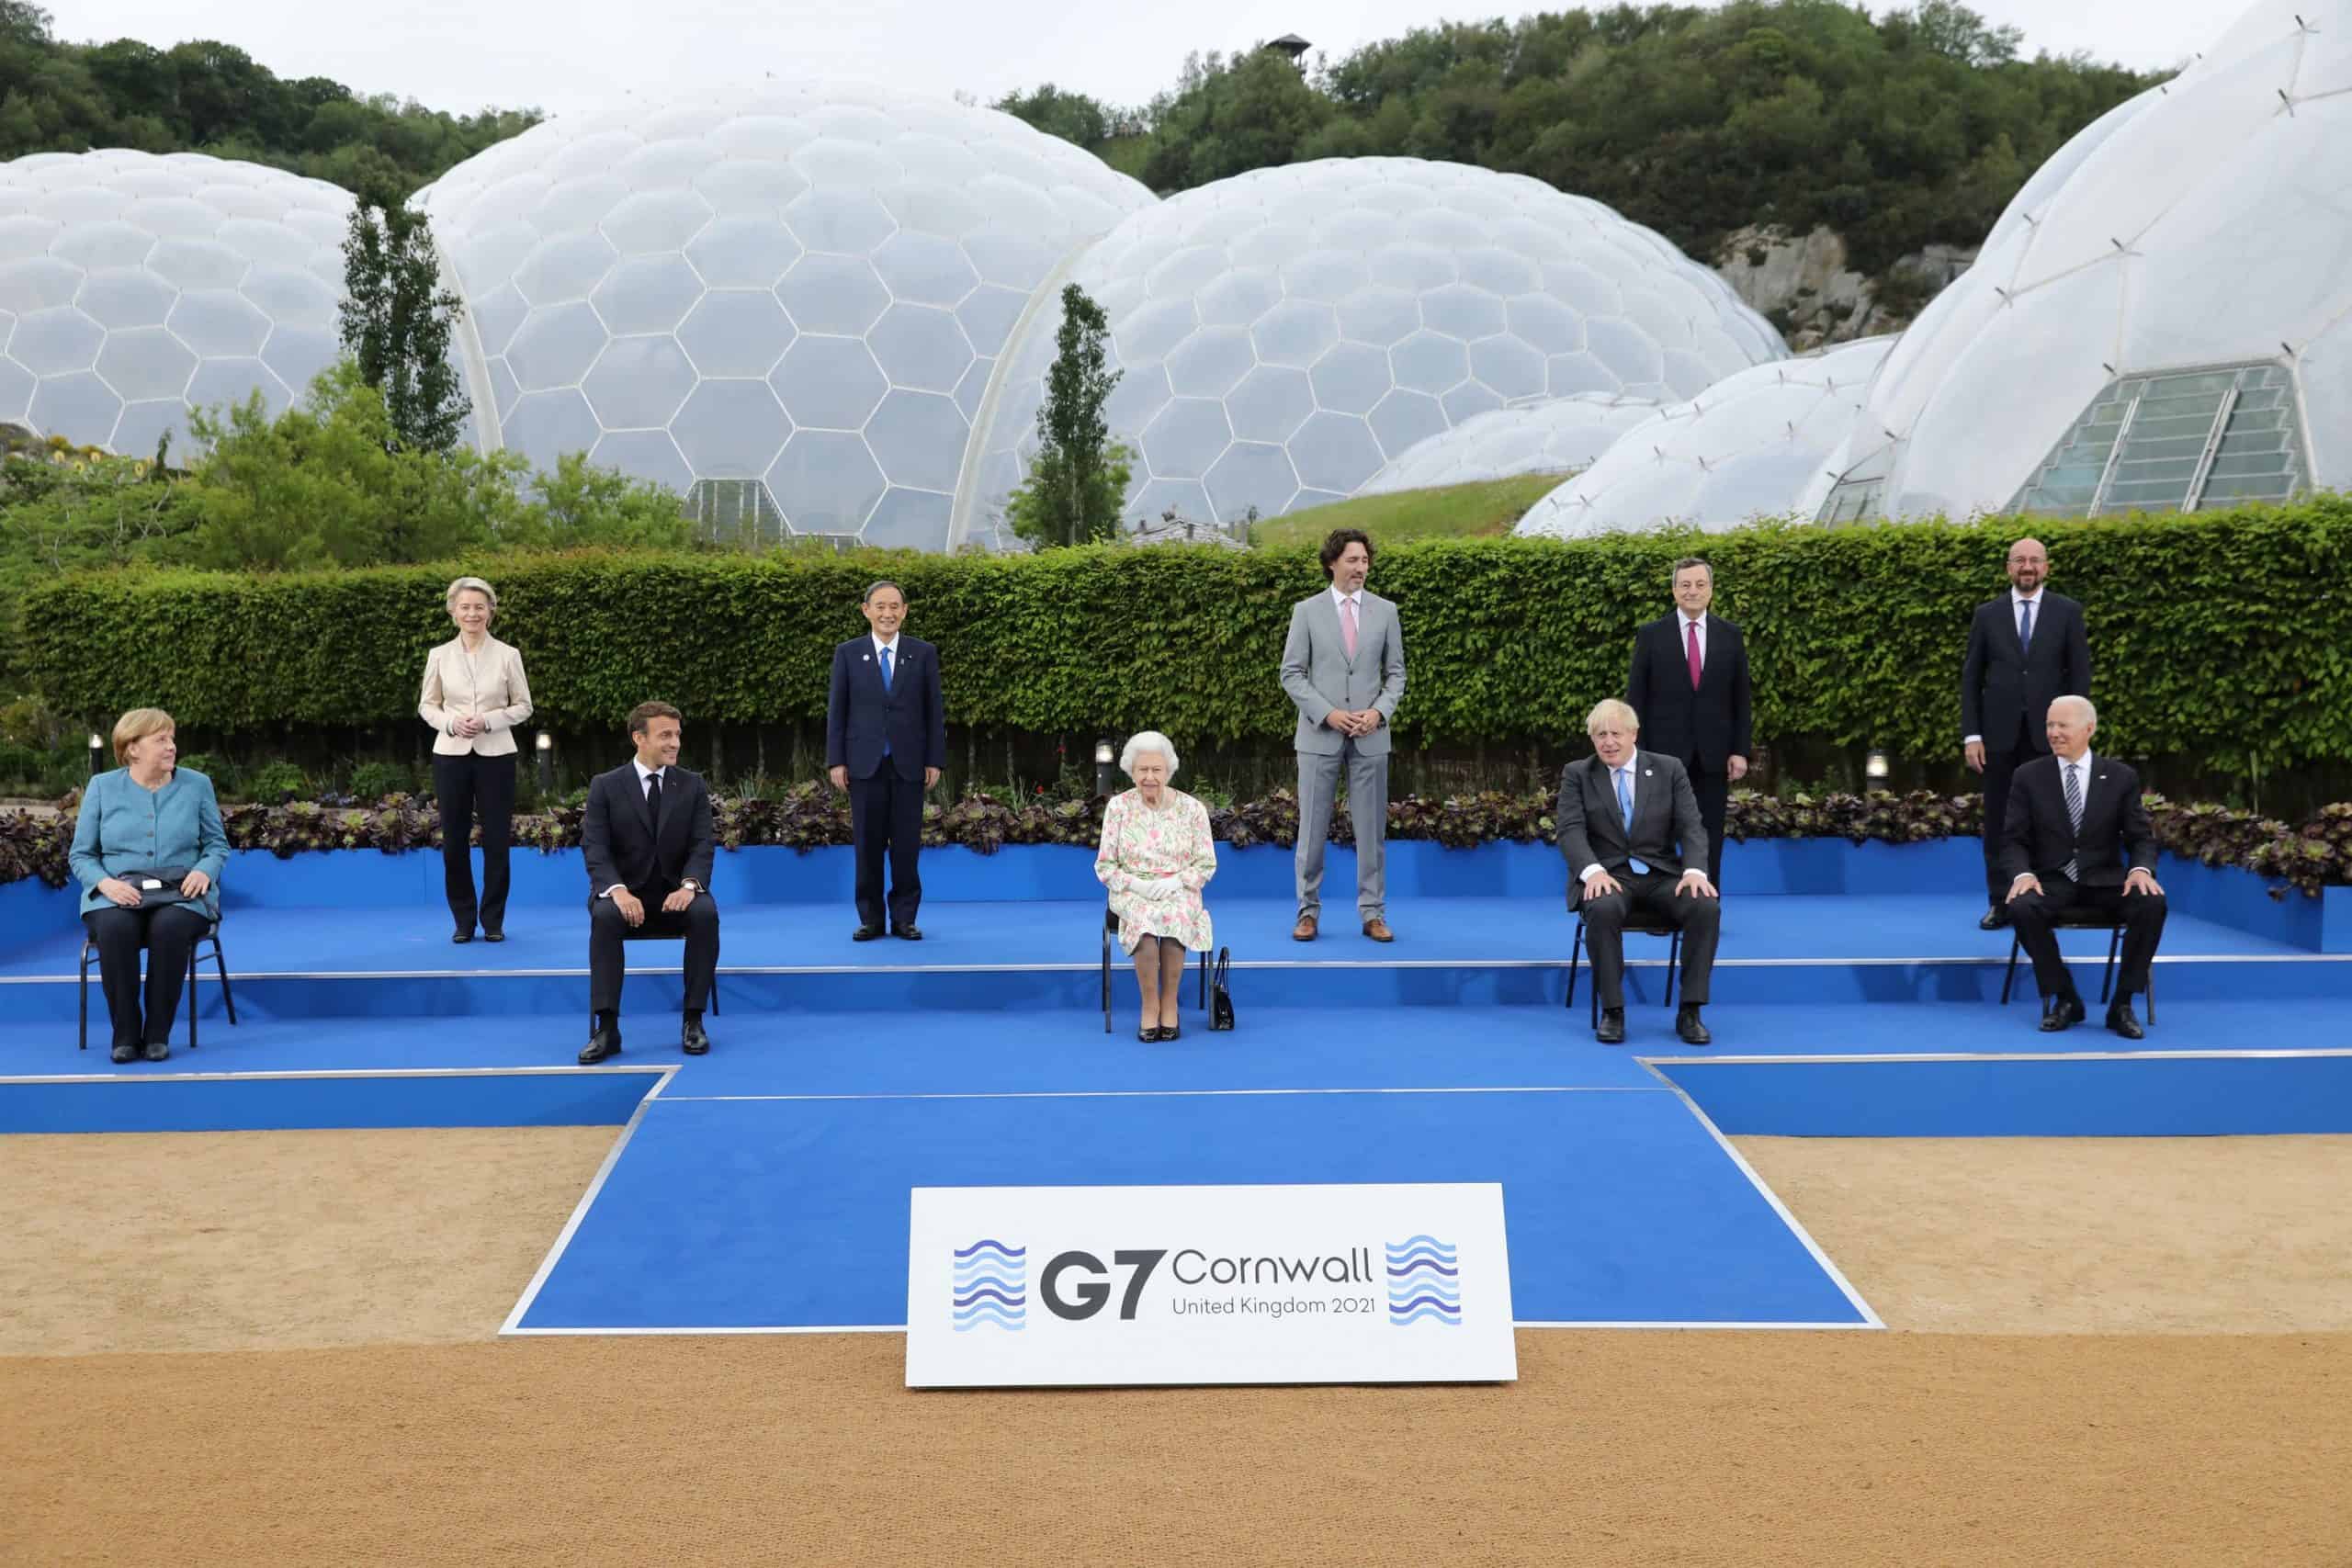 ‘Are you supposed to look as if you are enjoying yourselves?’ – Queen joins in trolling of G7 pics